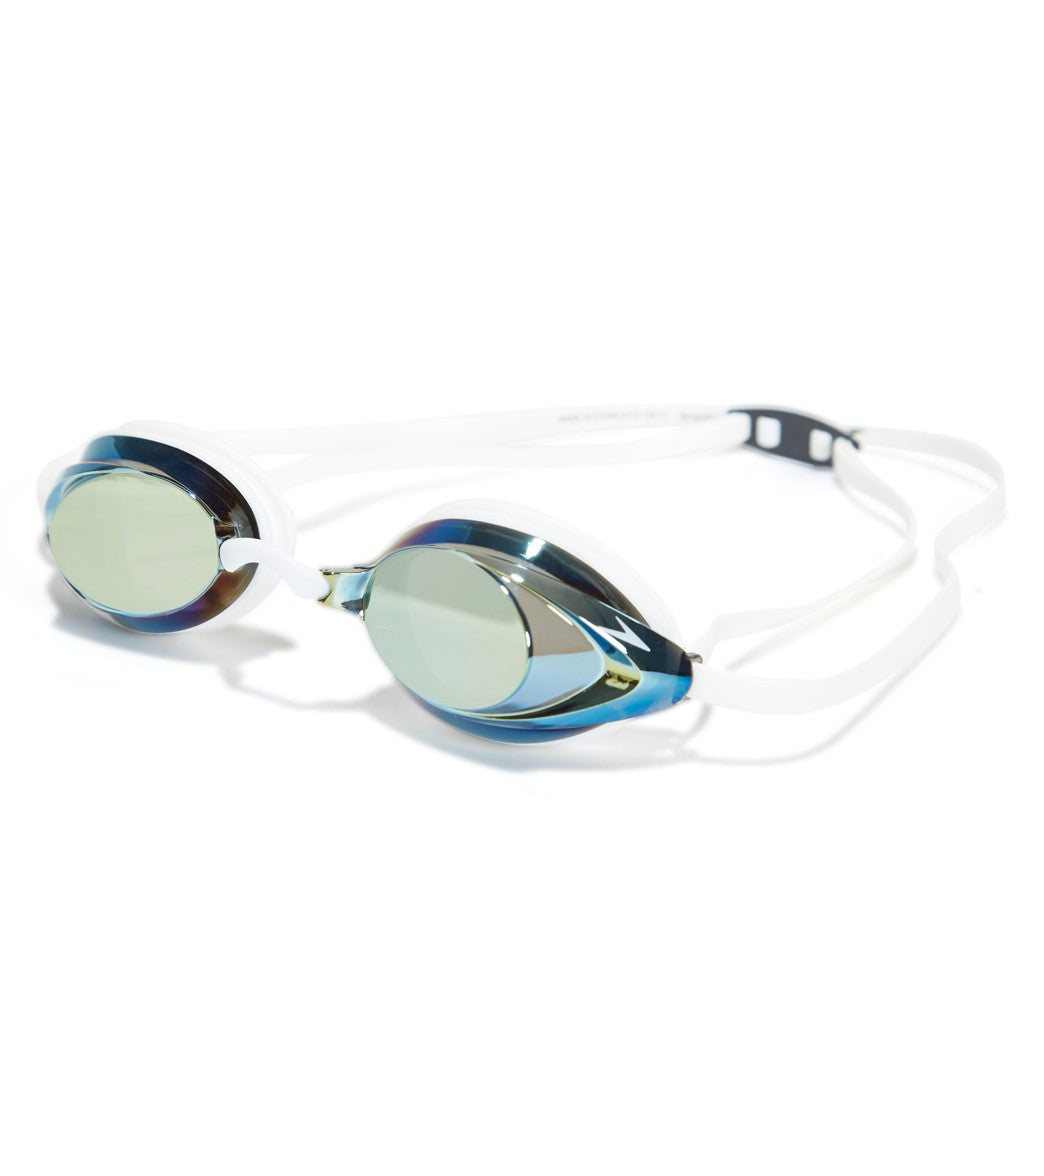 Speedo Vanquisher 2.0 Mirrored Goggle Gold/White at SwimOutlet.com